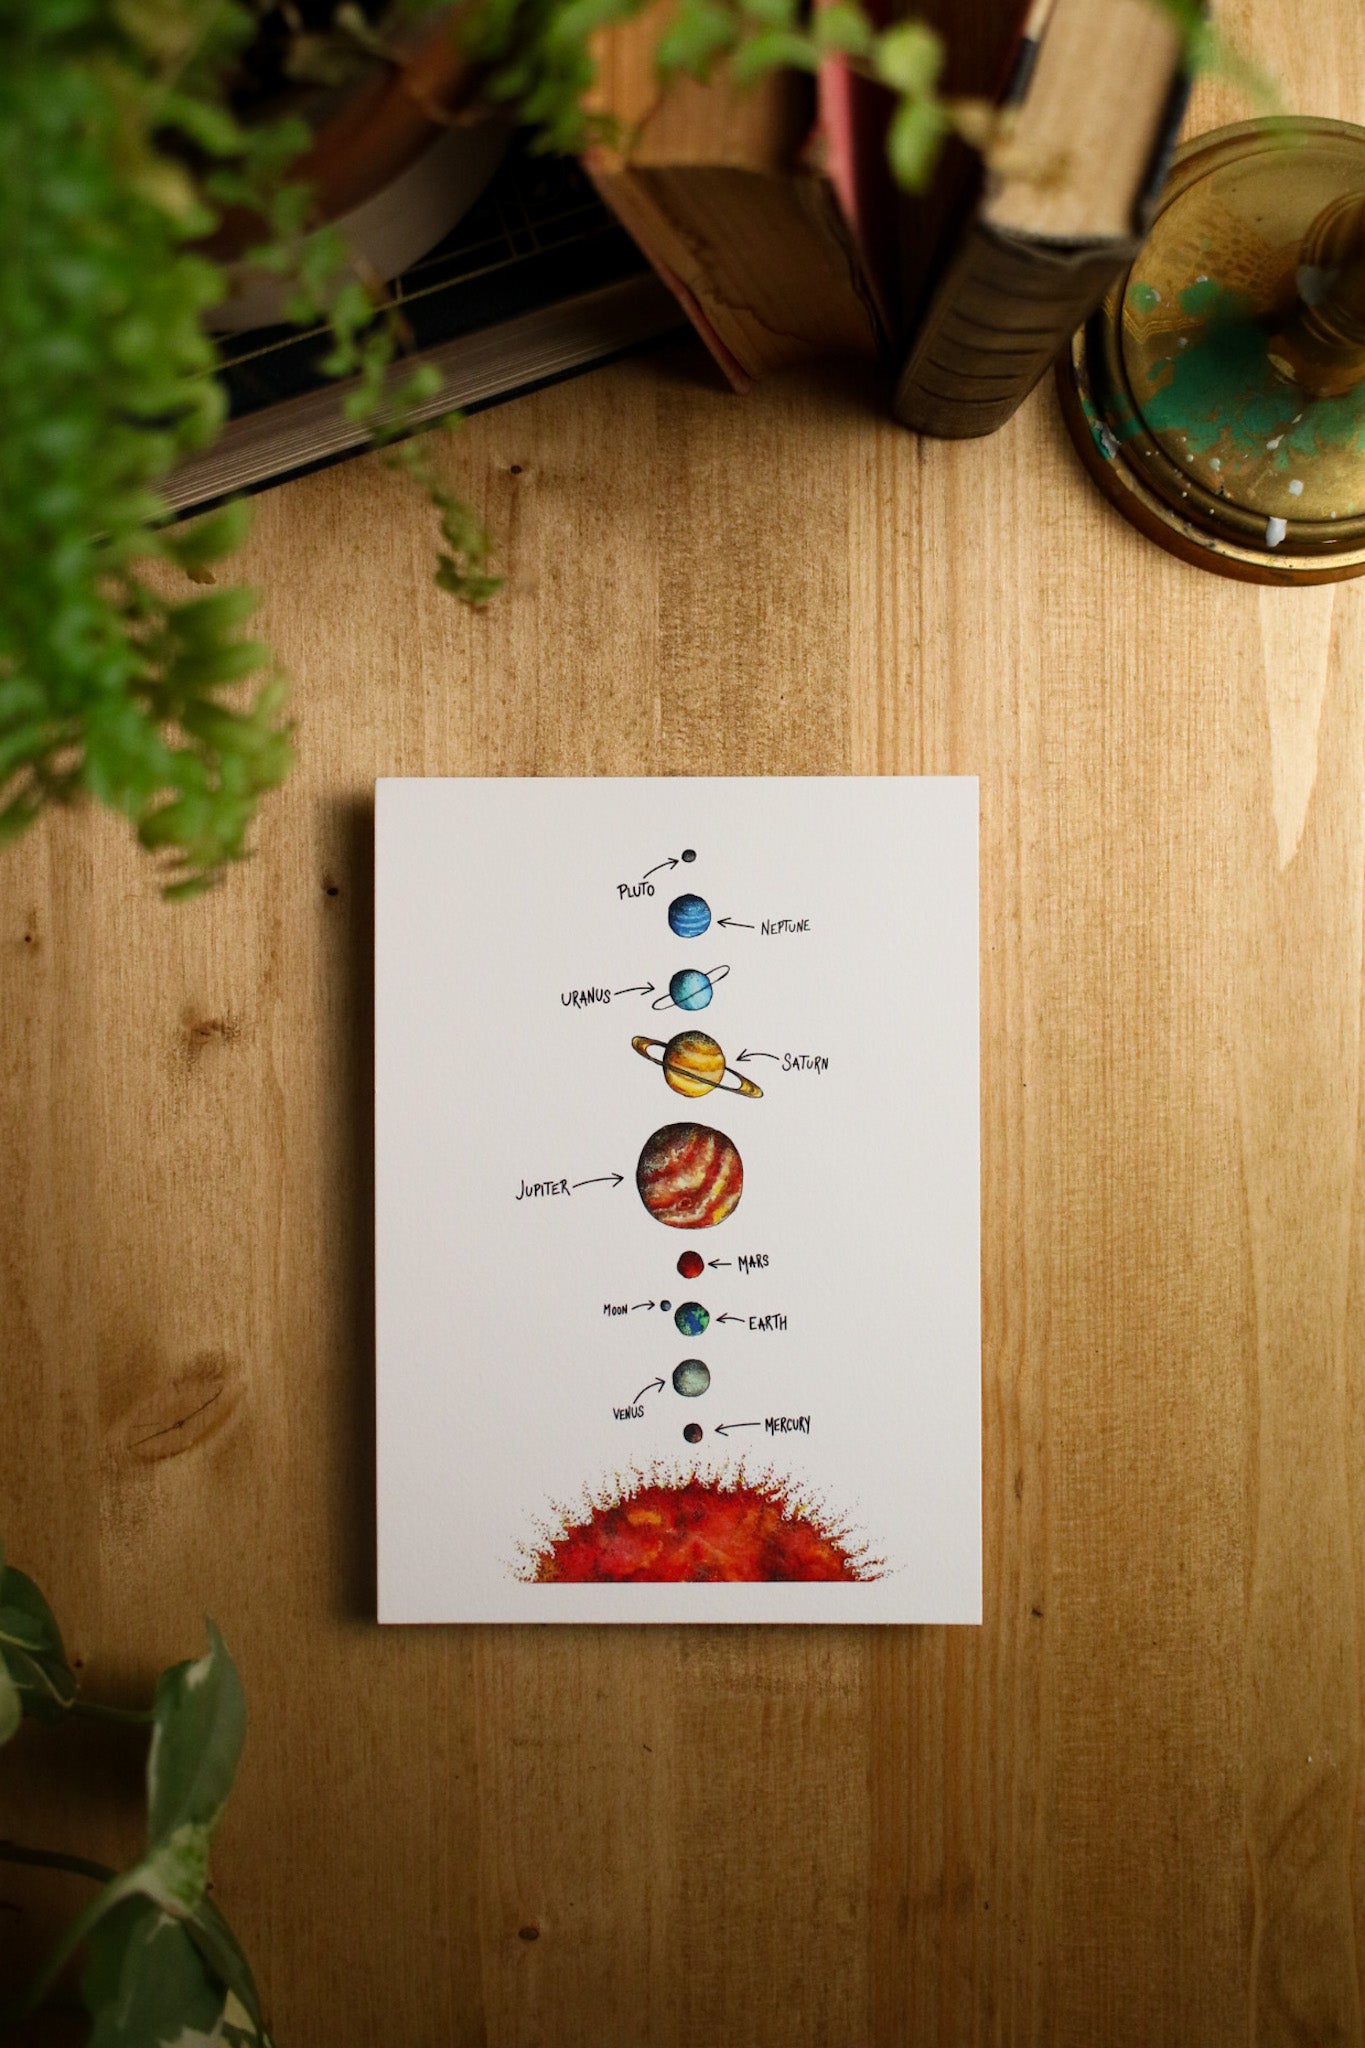 SECONDS - Solar System (Labelled) 5x7 Print